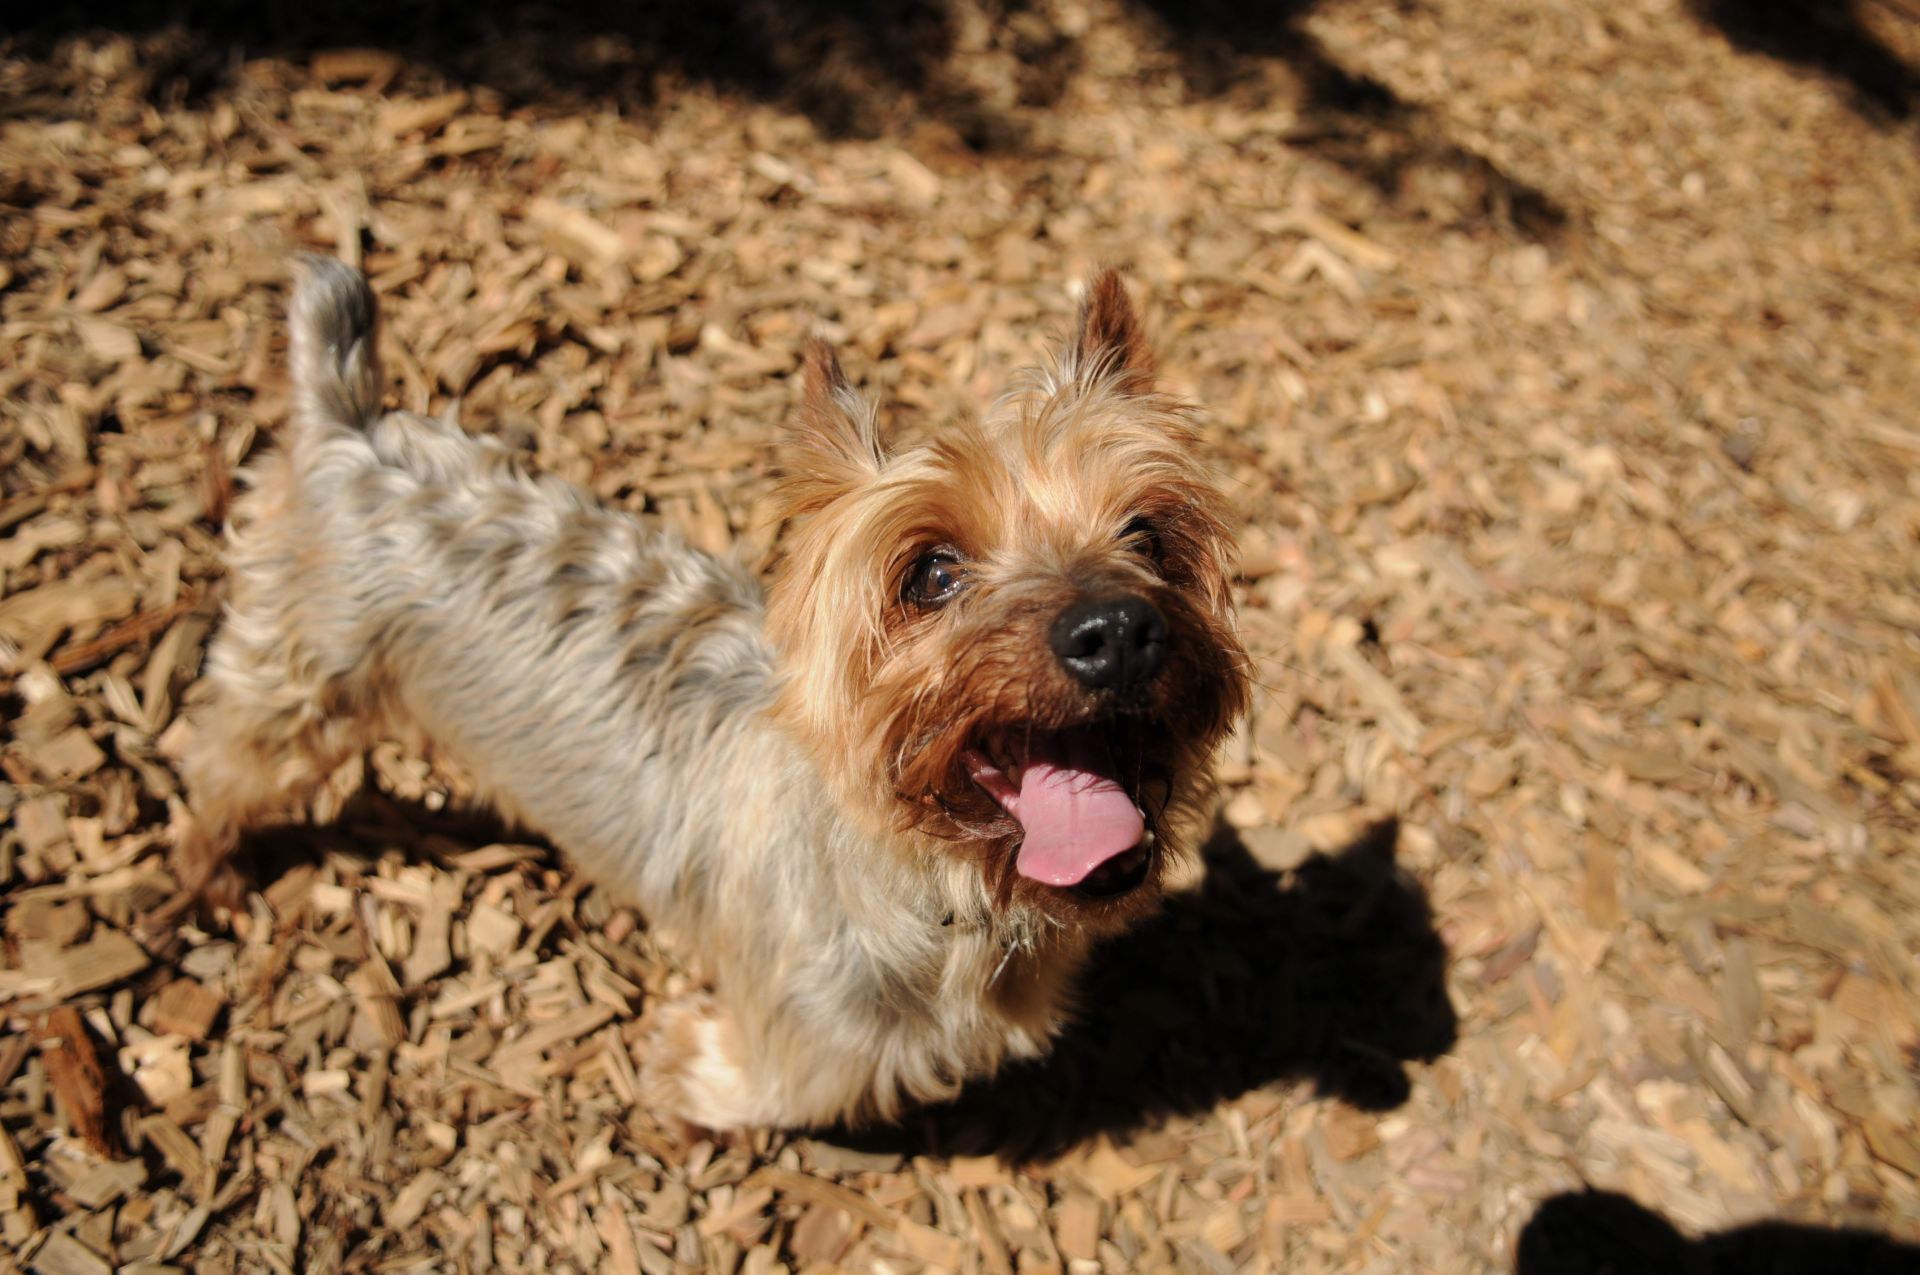 Murphy the Austrailian silky terrier posing for the camera with tongue out